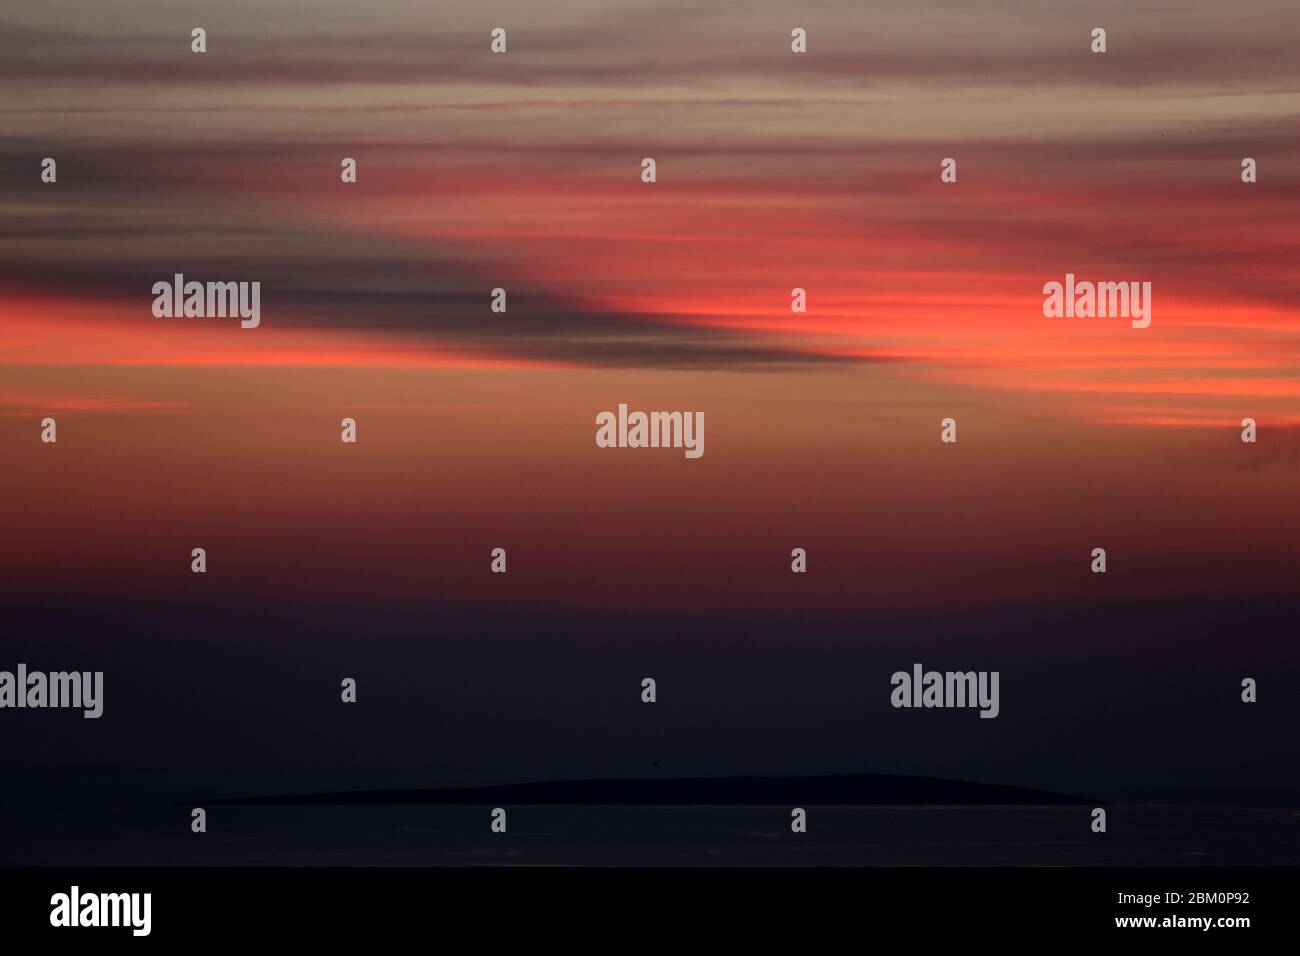 Apstract red blurry clouds on a dark sky during sunset Stock Photo